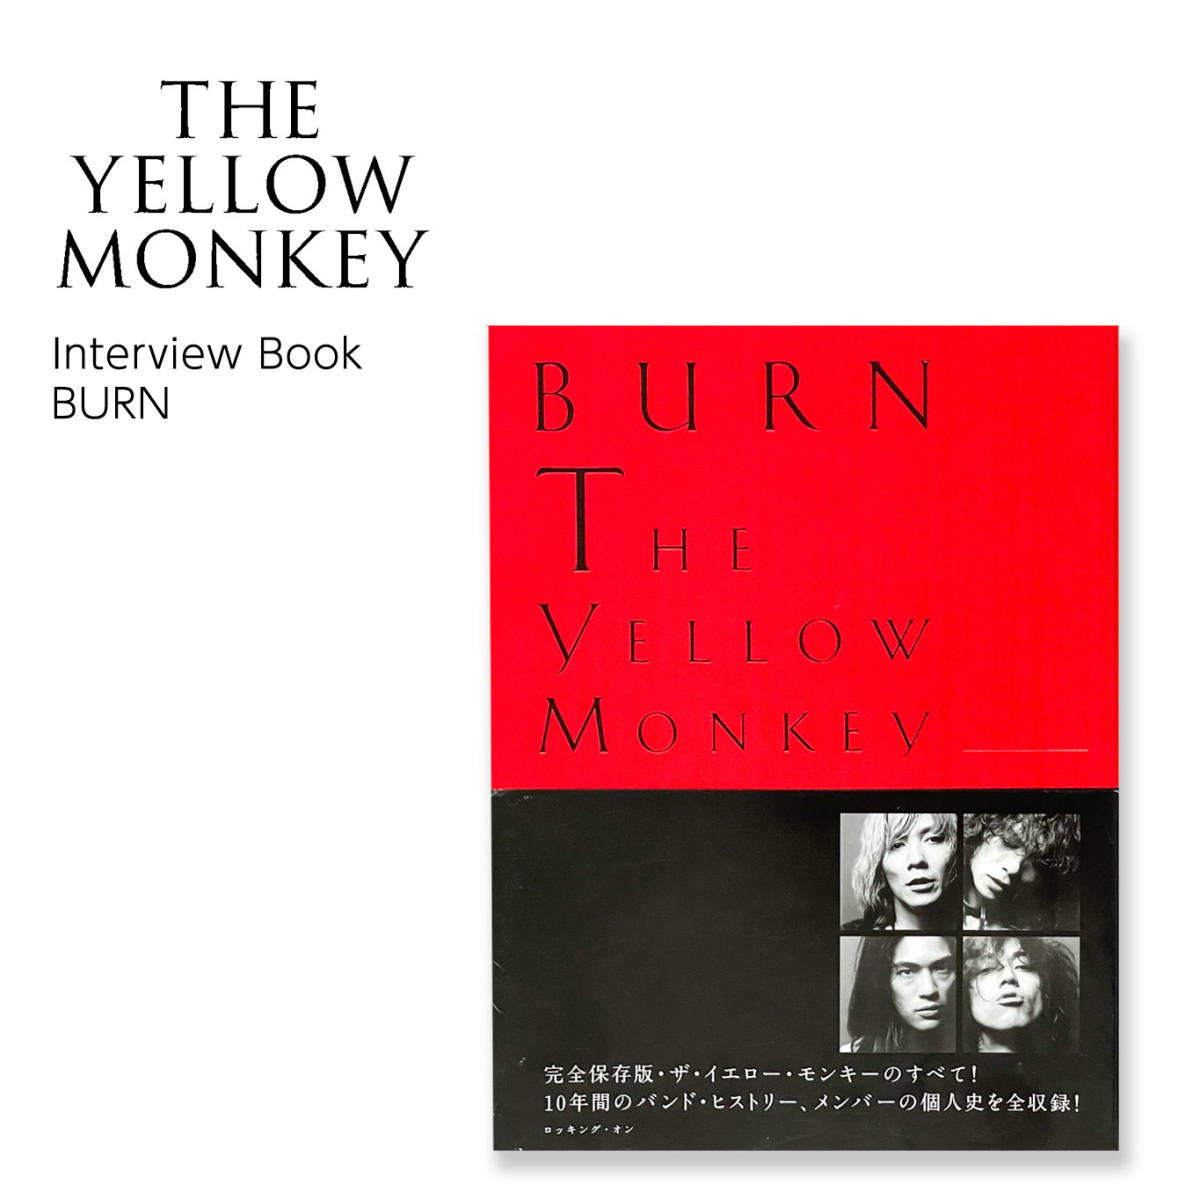 THE YELLOW MONKEY Interview Book「BURN」 [1]｜代購幫